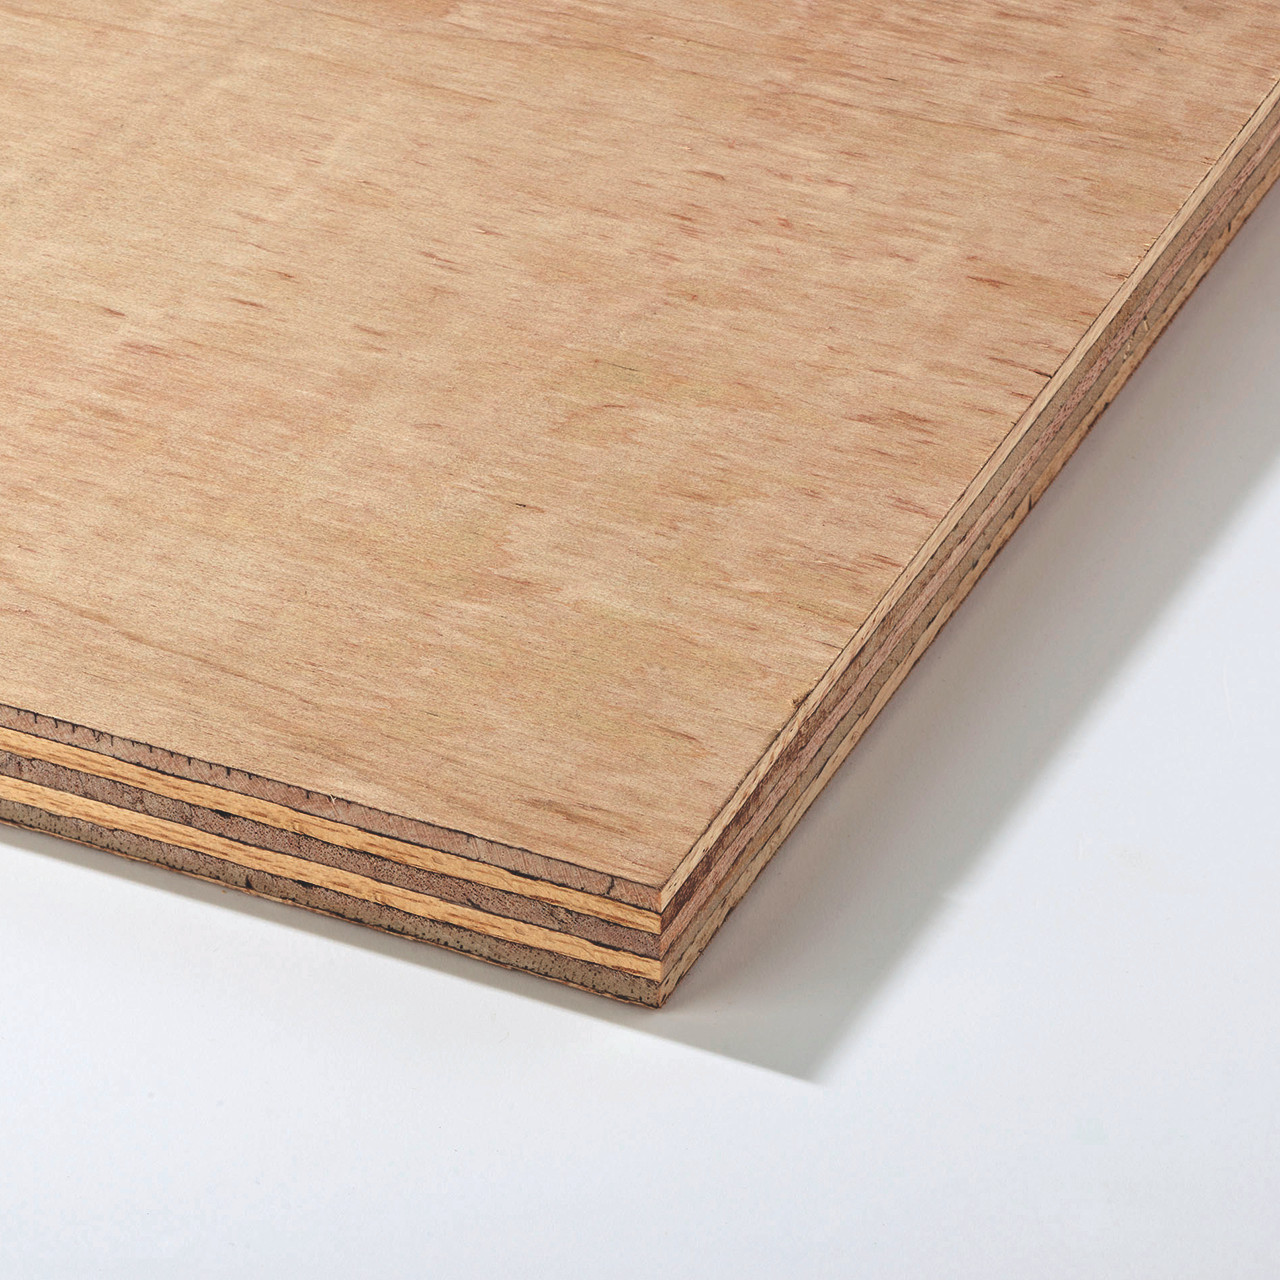 Photograph of Far Eastern Hardwood Faced Plywood 2440 X 1220 X 6mm (5.5mm)